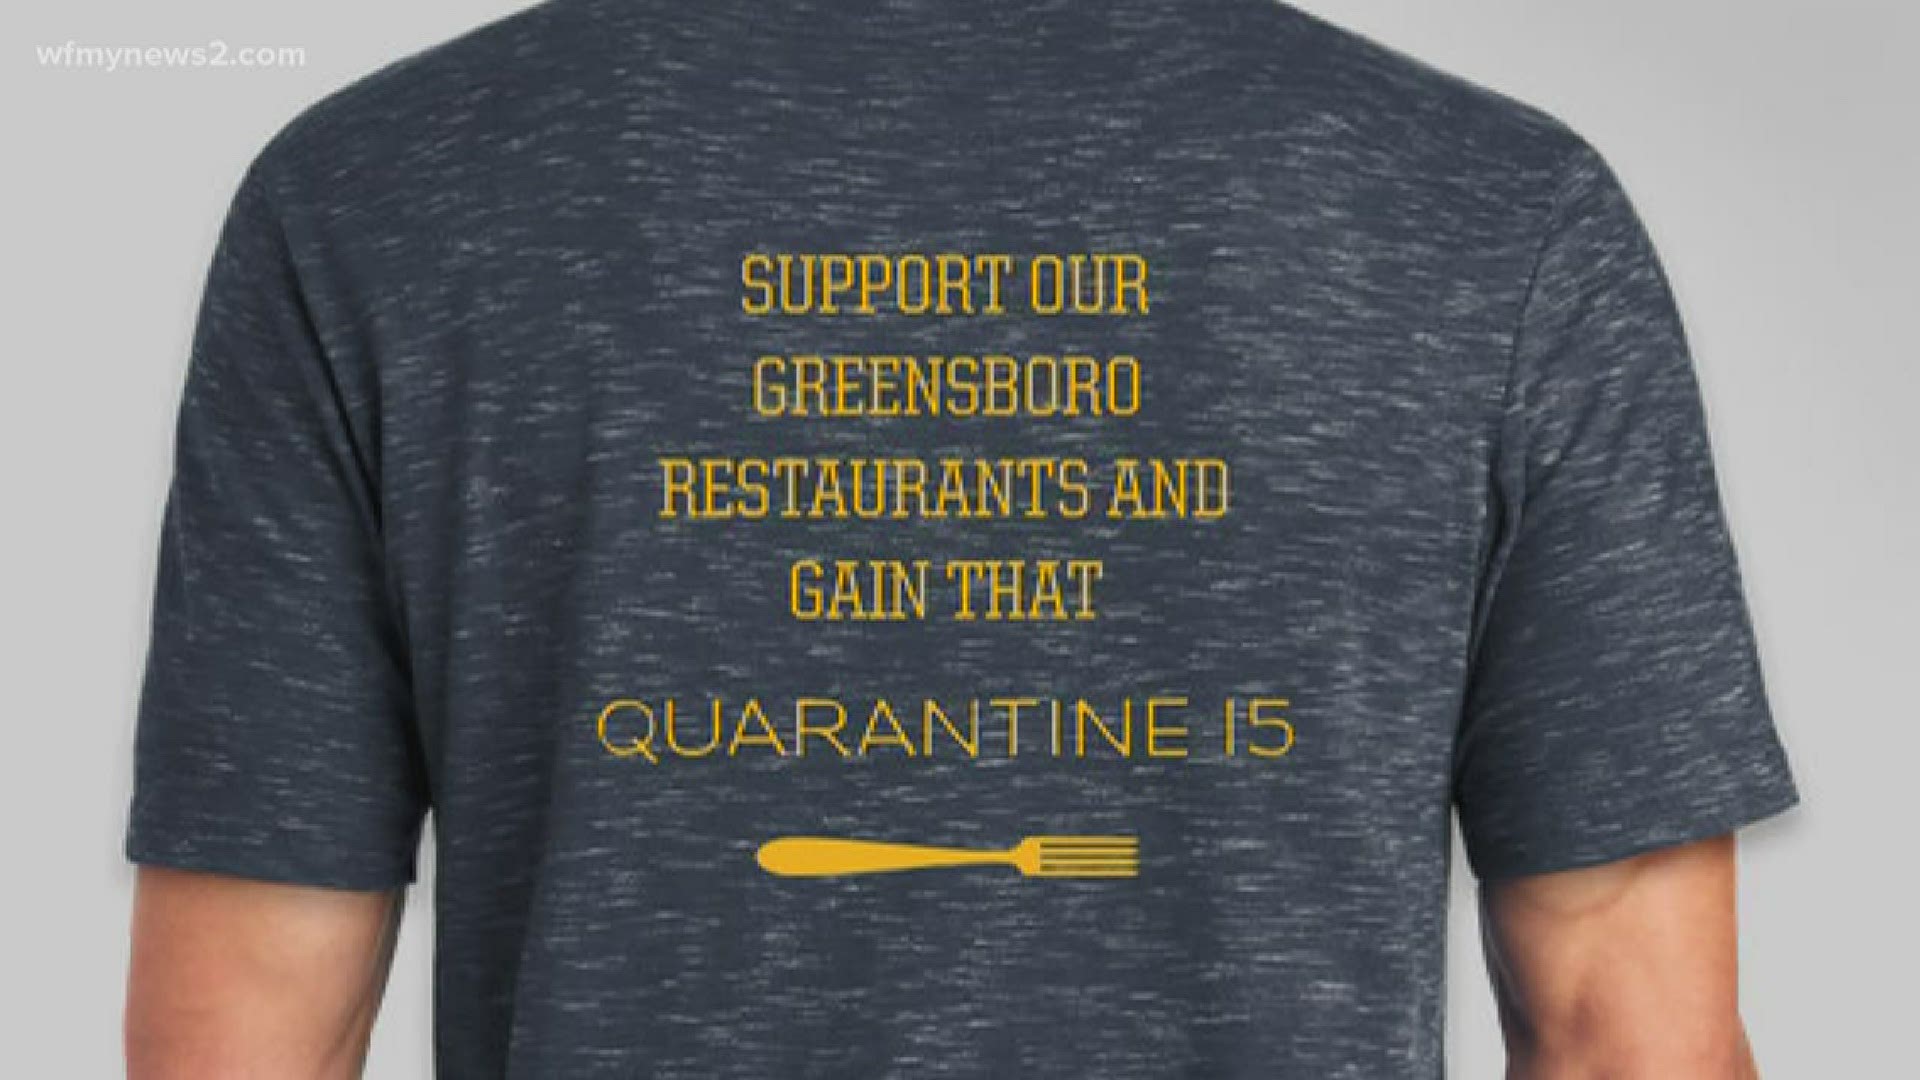 A Greensboro family is stepping up to help those in the Greensboro restaurant industry impacted by coronavirus by selling t-shirts. Here's how you can help.